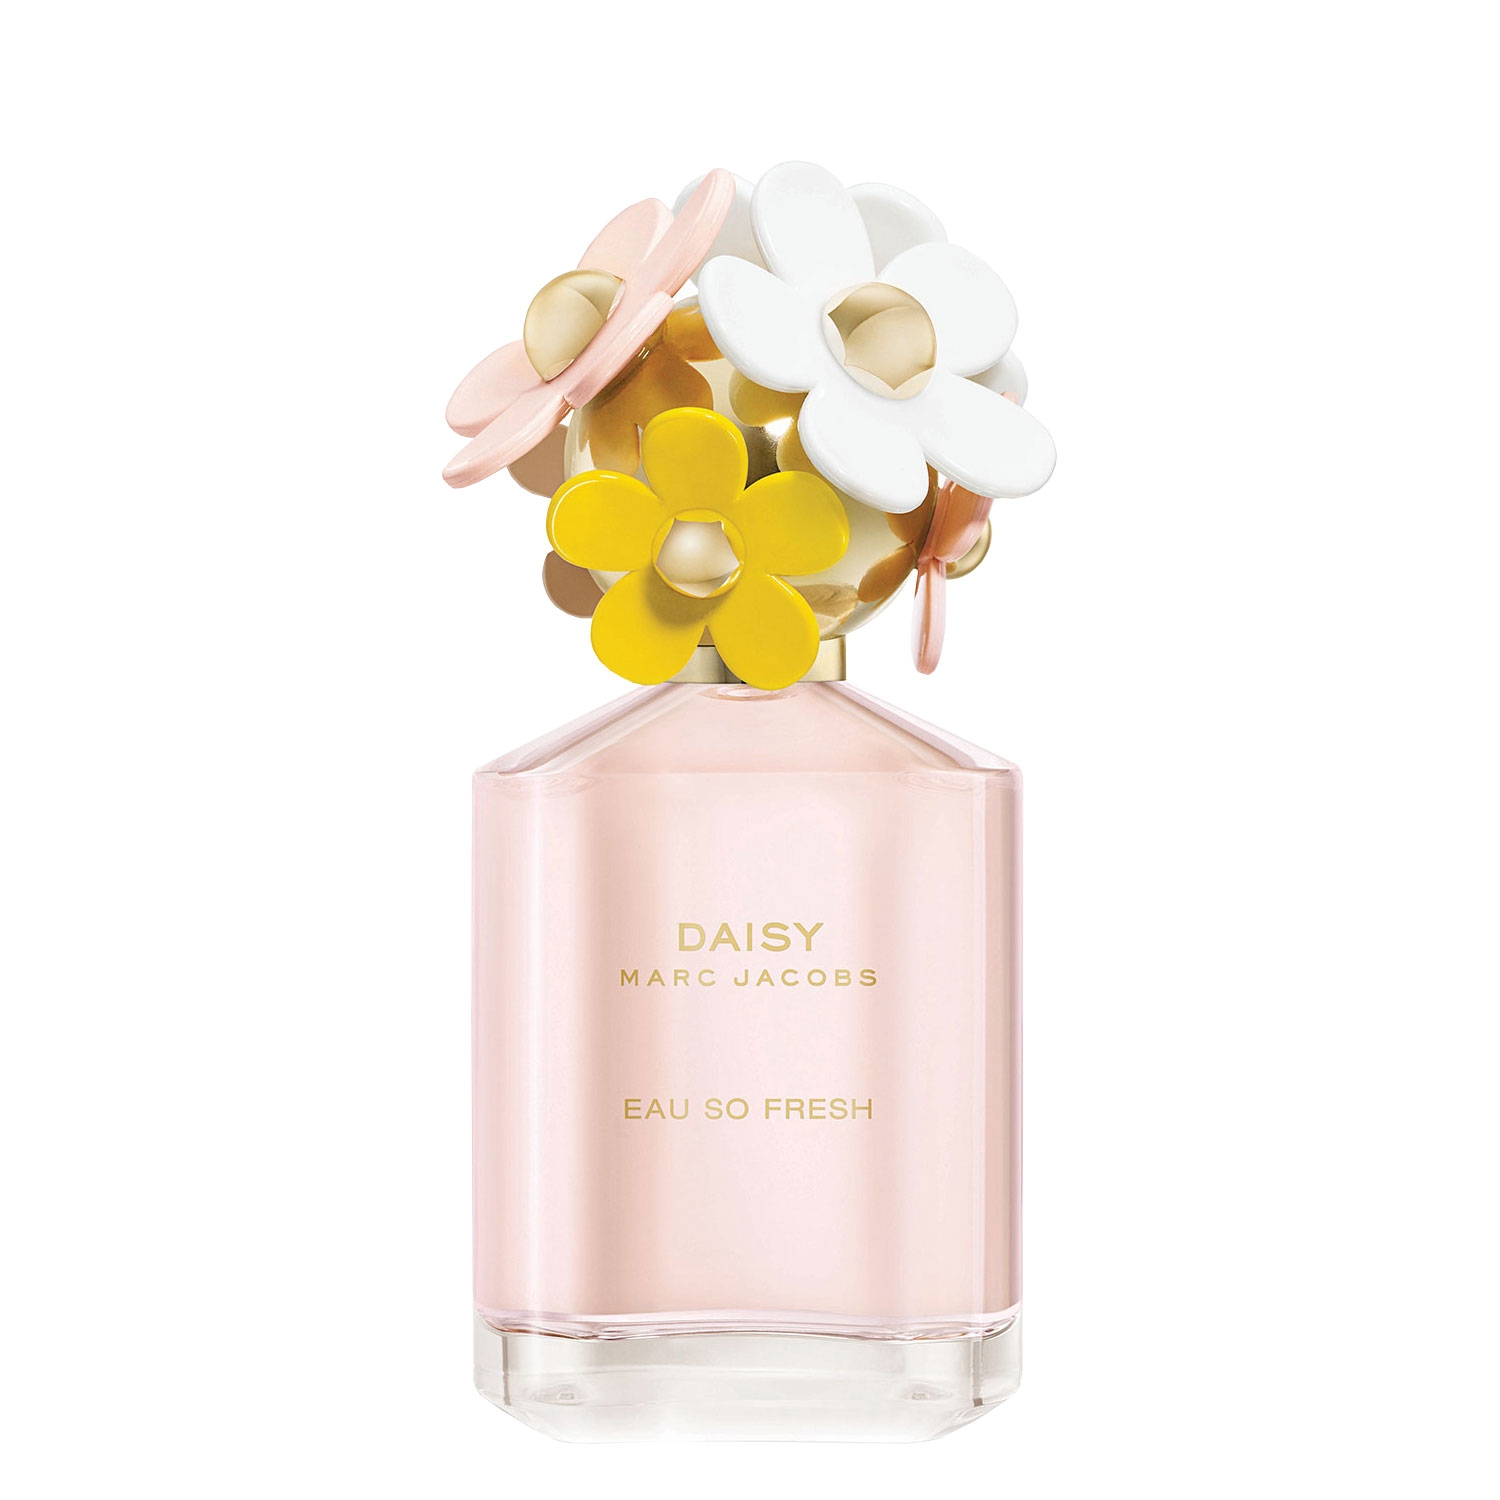 Product image from Marc Jacobs - Daisy Eau so Fresh